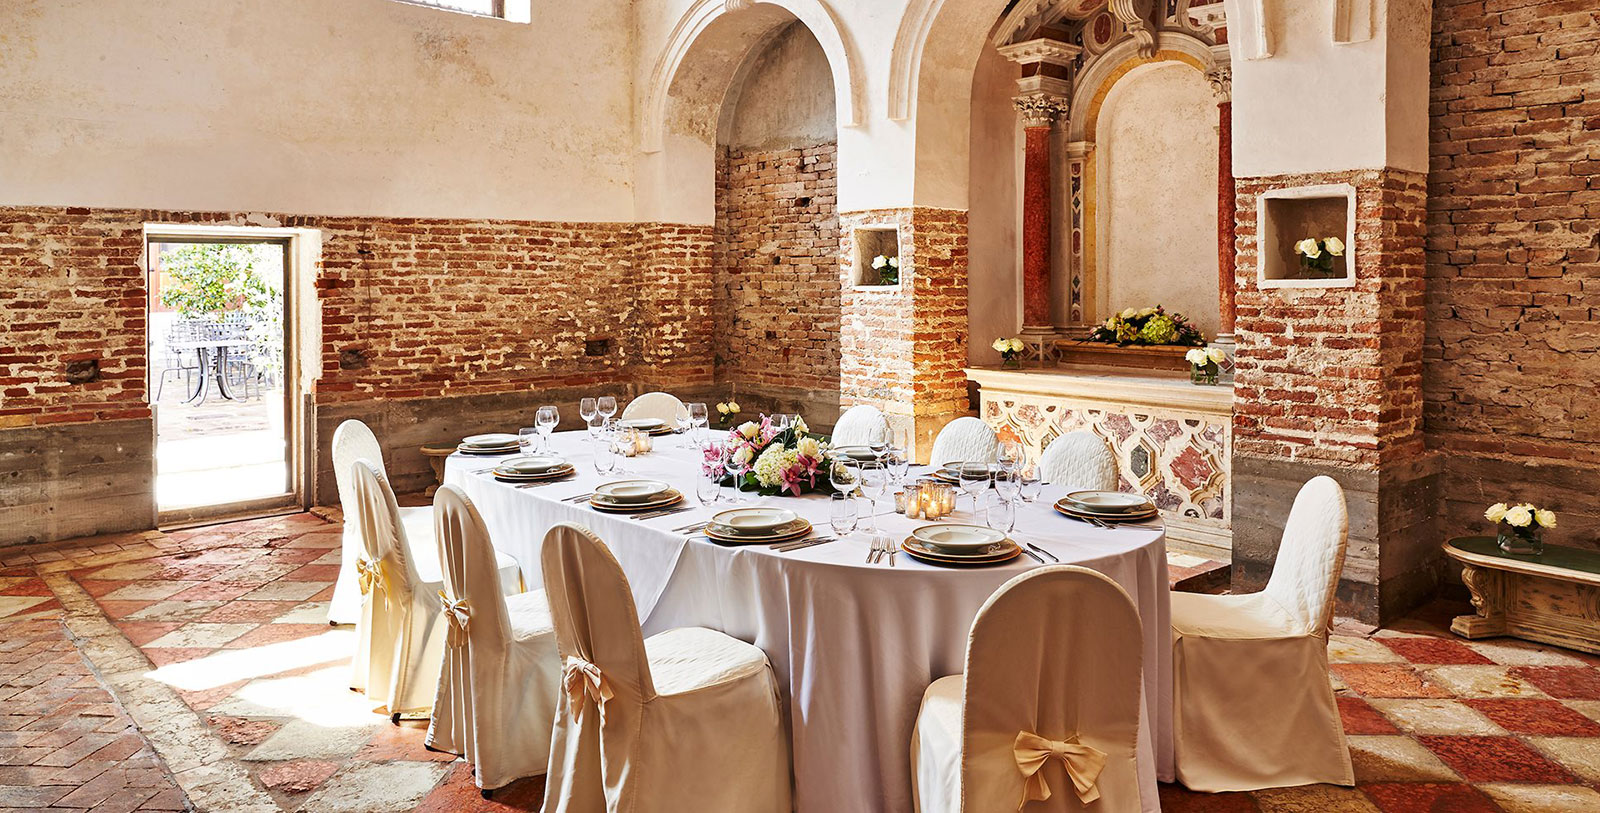 Image of Outdoor Dining Terrace at San Clemente Palace Kempinski, 1131, Member of Historic Hotels Worldwide, in Venice, Italy, Special Occasions